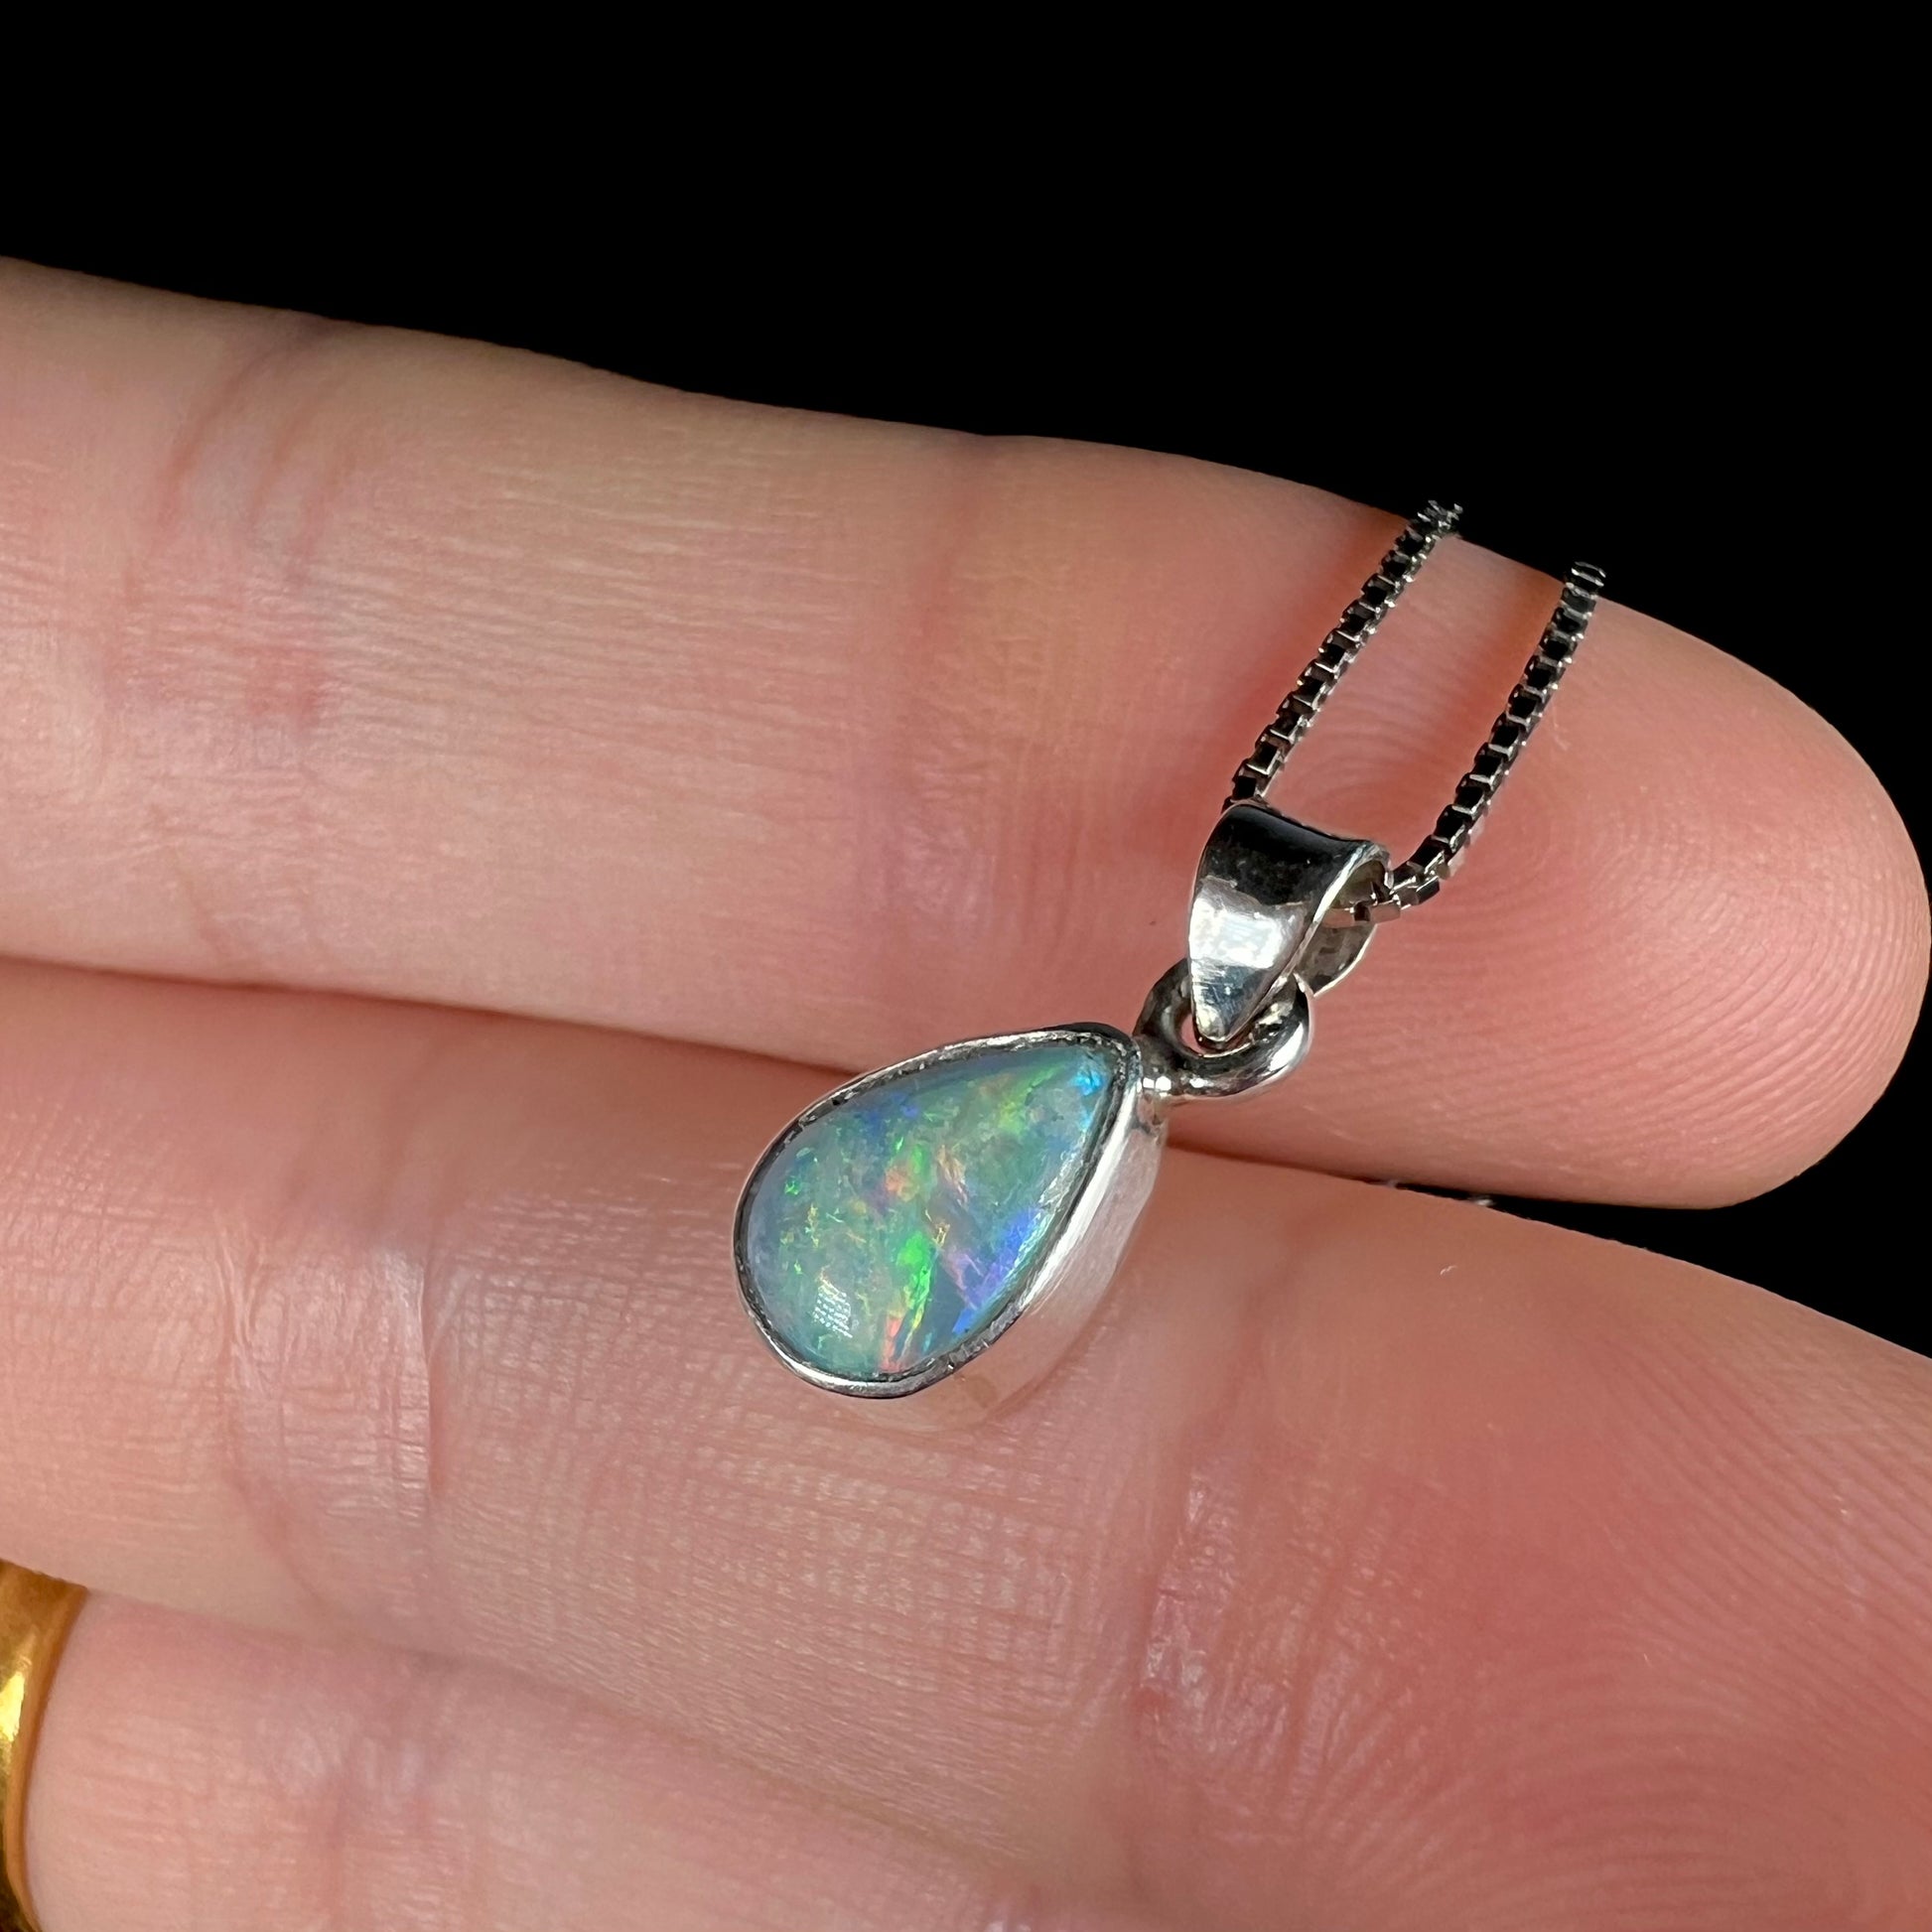 A dainty, sterling silver necklace bezel set with a natural, pear shaped opal stone.